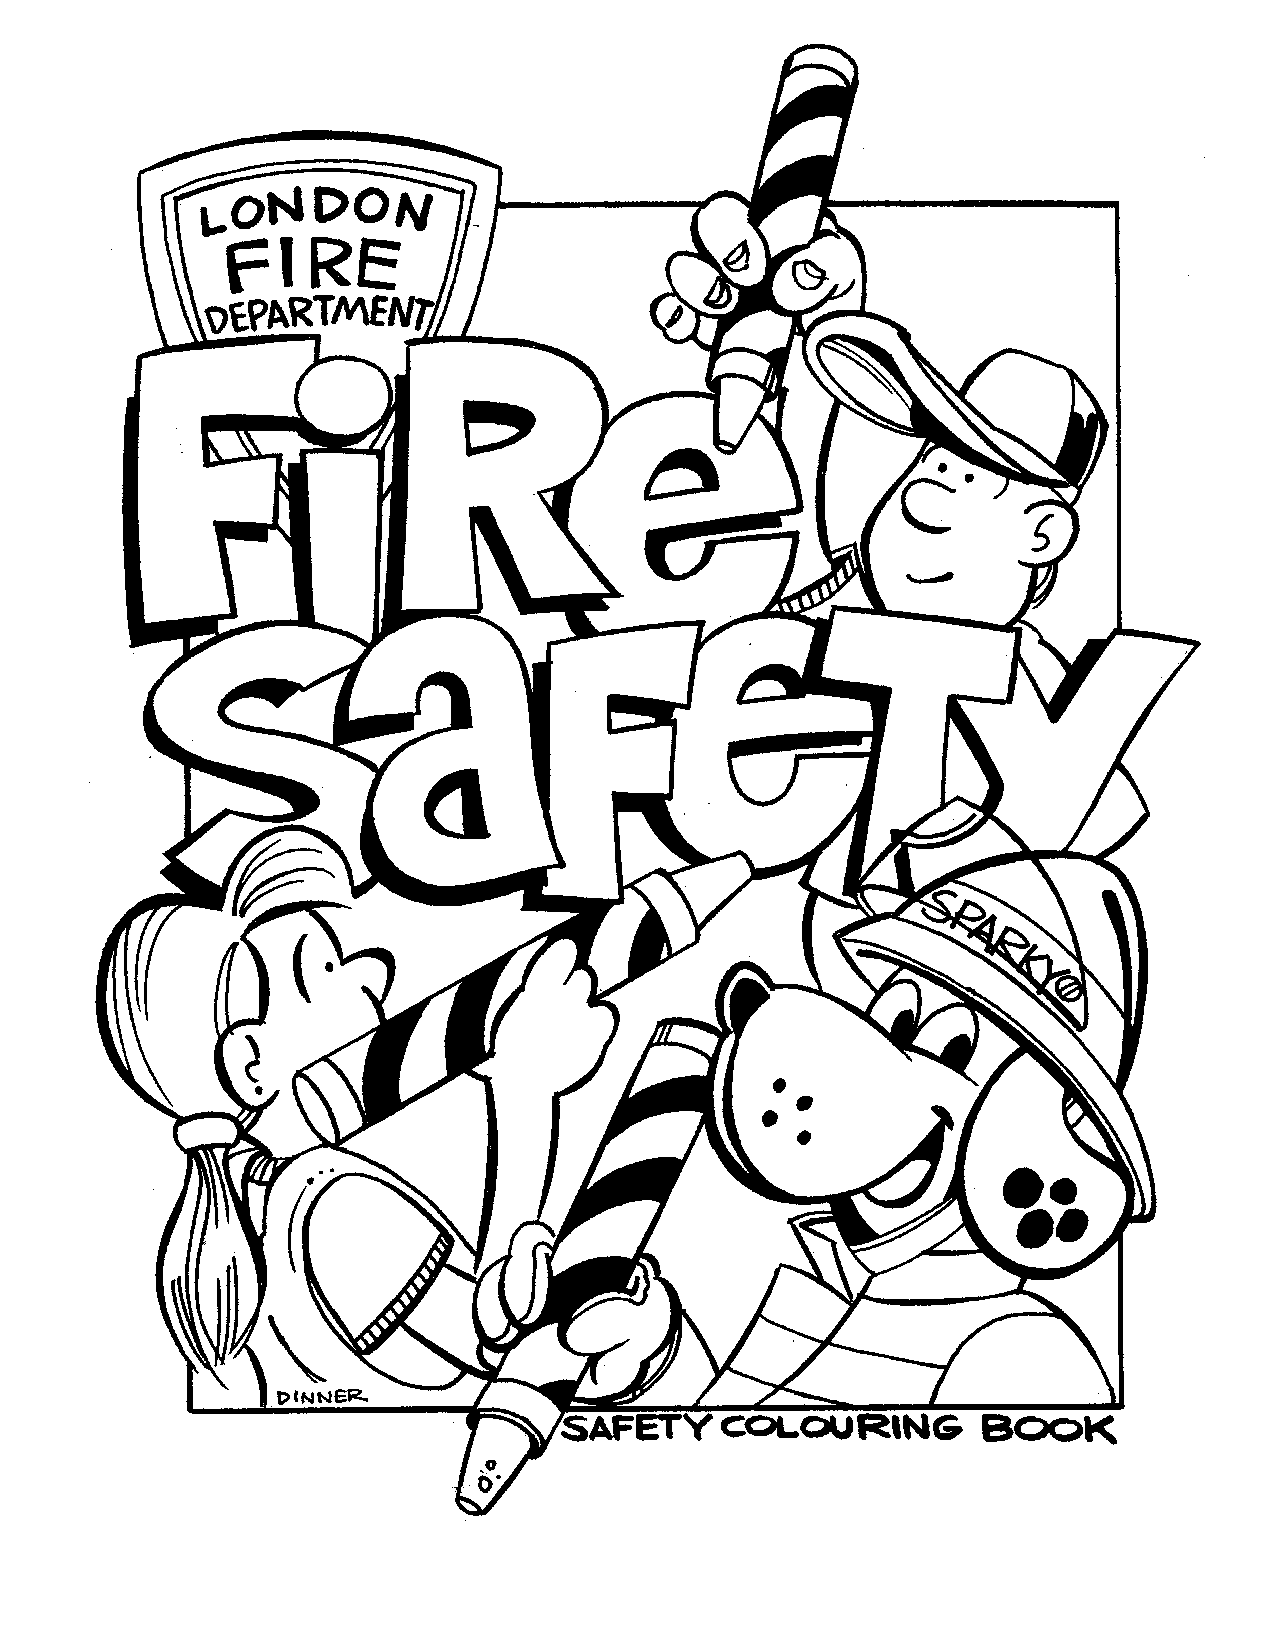 Fire Safety Coloring Pages, prevention road signs Colouring Pages ...